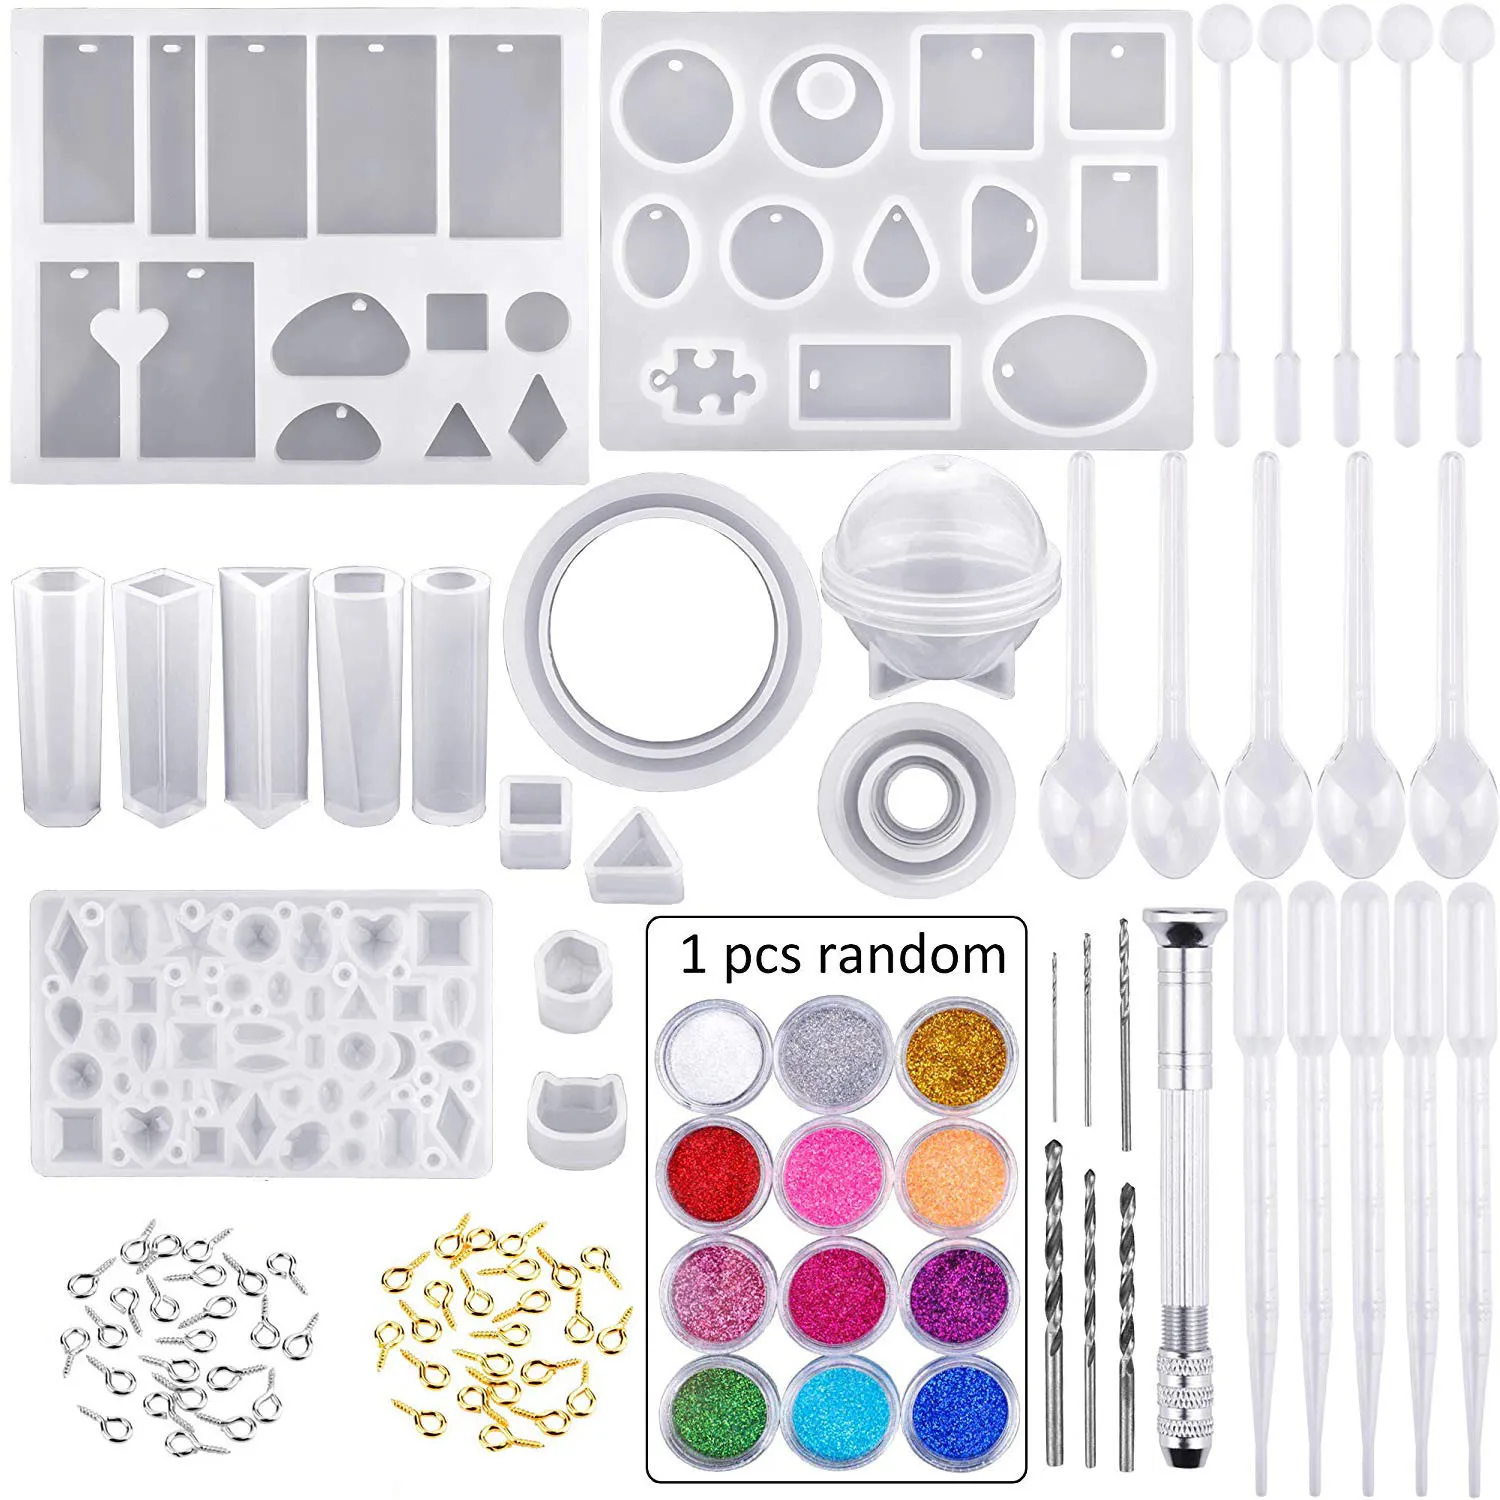 

94 pcs crystal epoxy resin kit jewelry with supplies customised jewelry sets bracelet pendant silicone molds moulds, Random